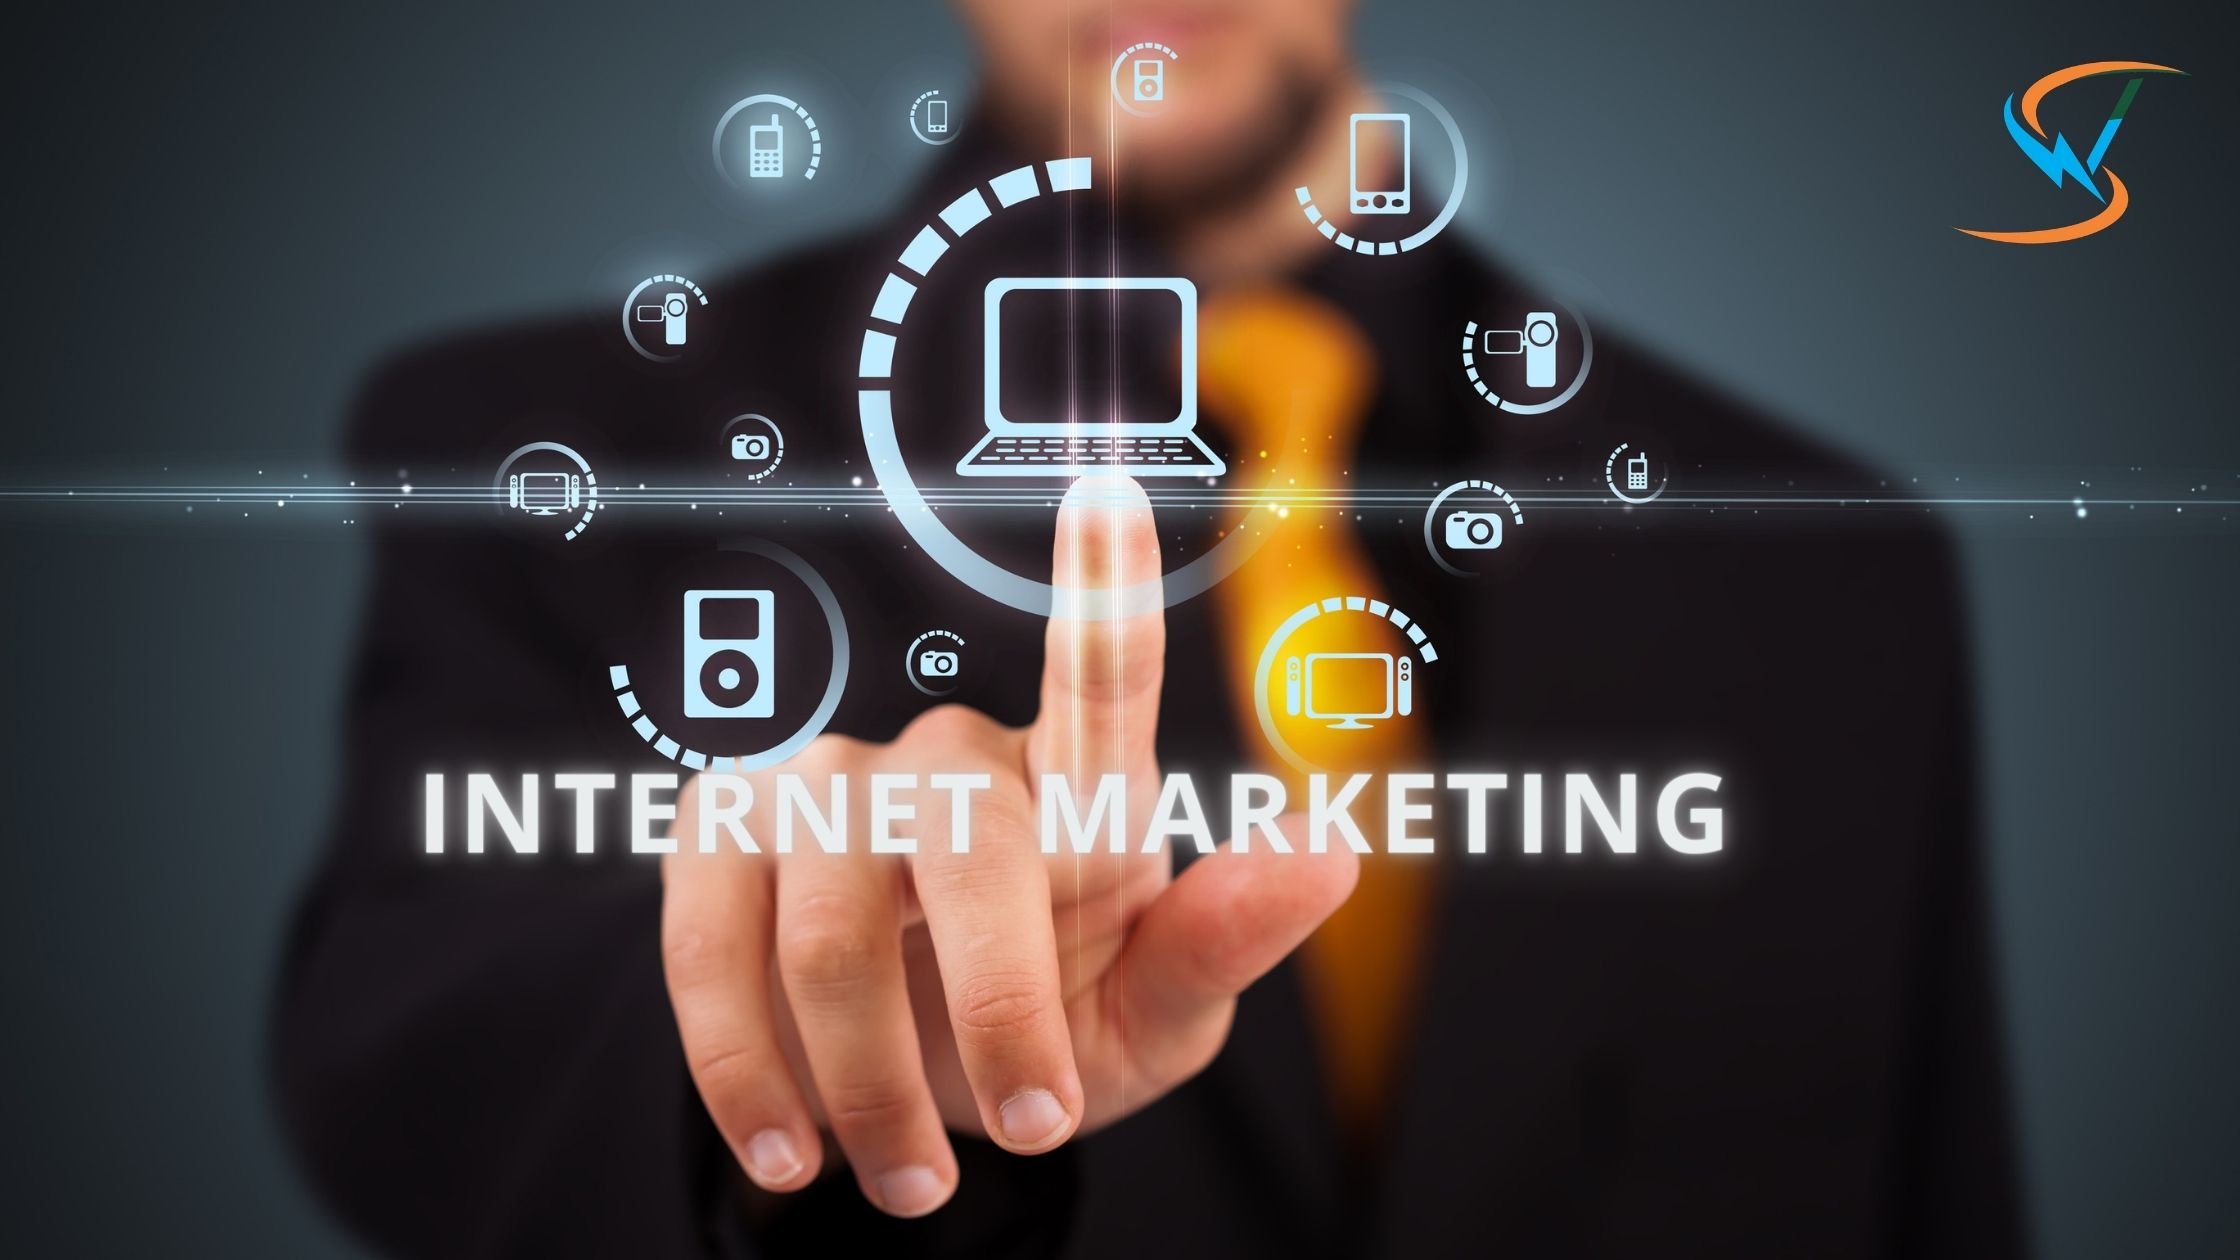 Check Out These Great Article Marketing Tips